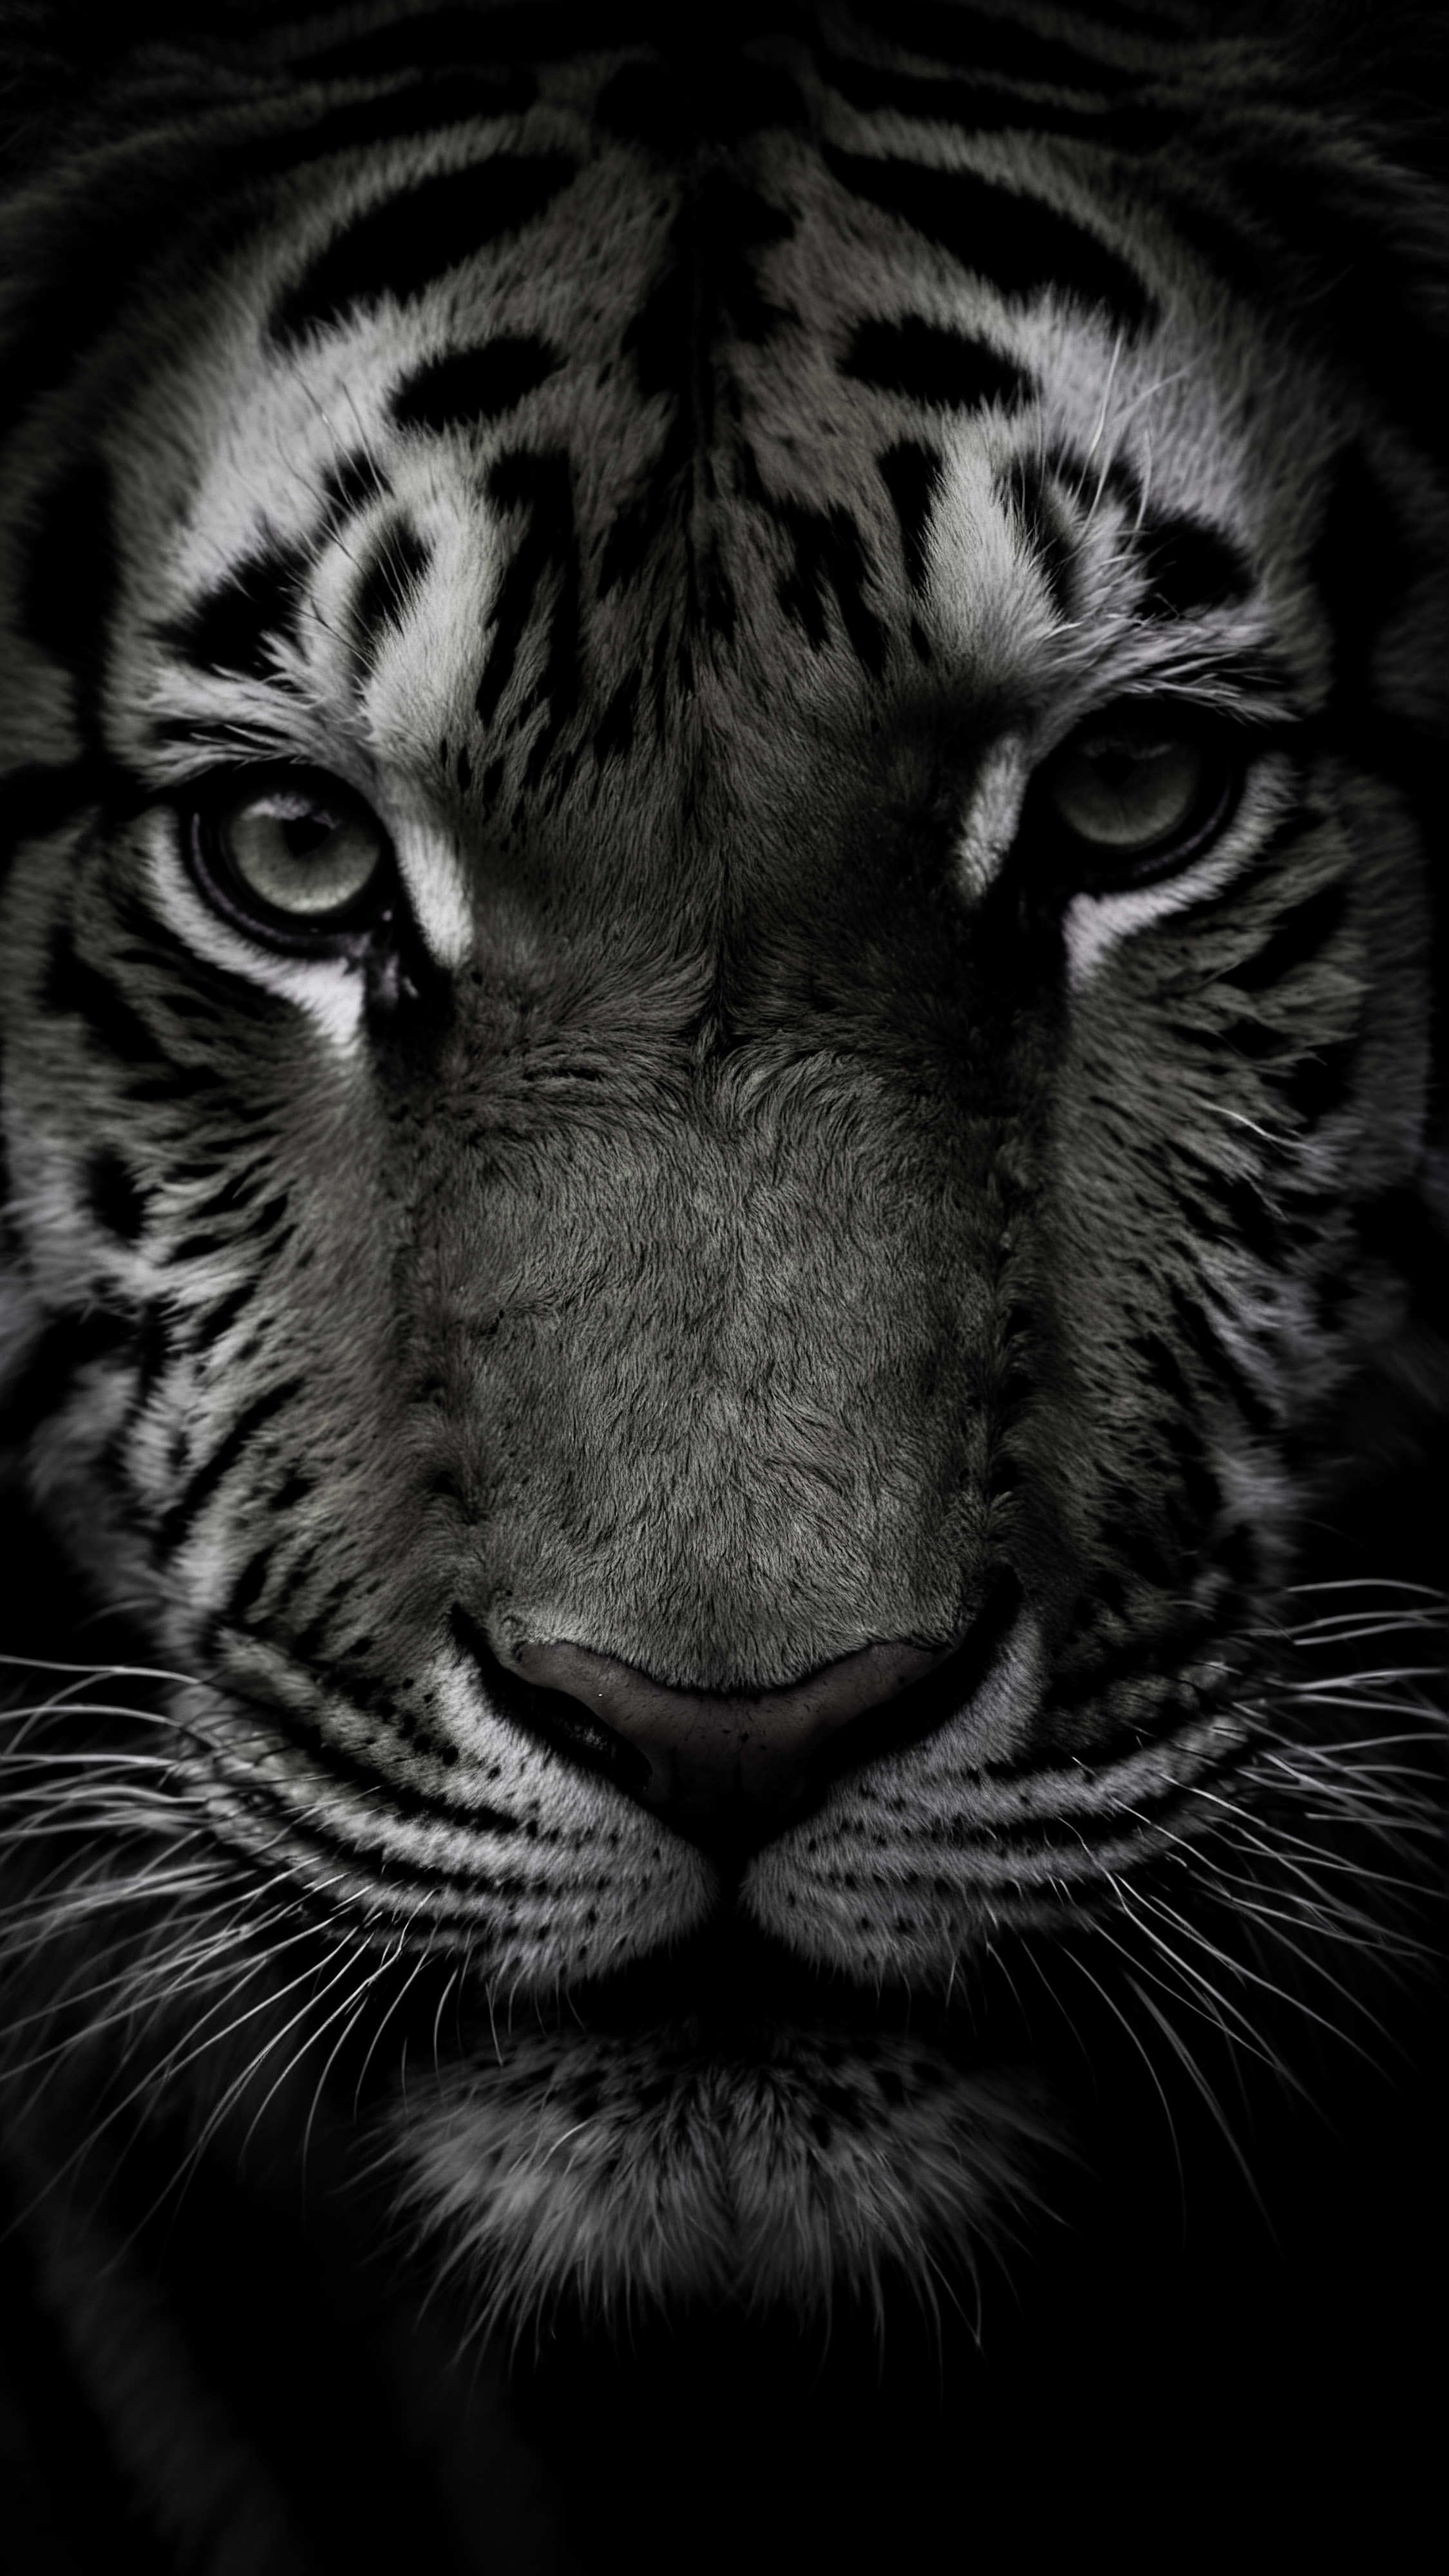 Admire the intensity of a tiger’s face, highlighted against a dark background, with our dark aesthetic wallpaper for iPhone.